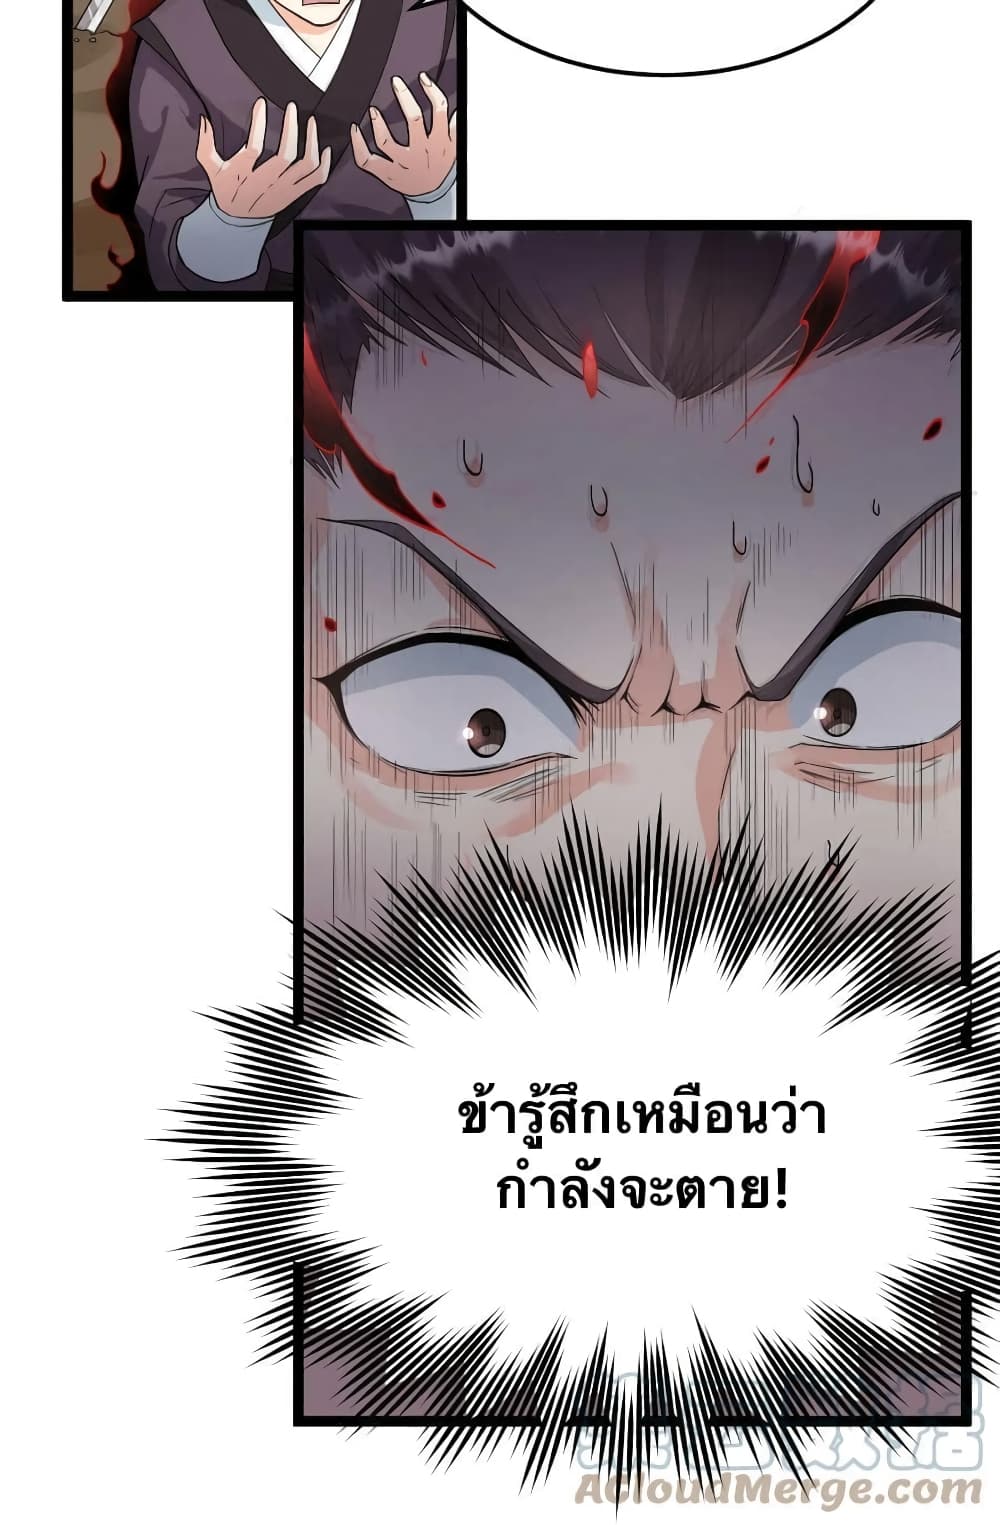 Godsian Masian from Another World 87 แปลไทย